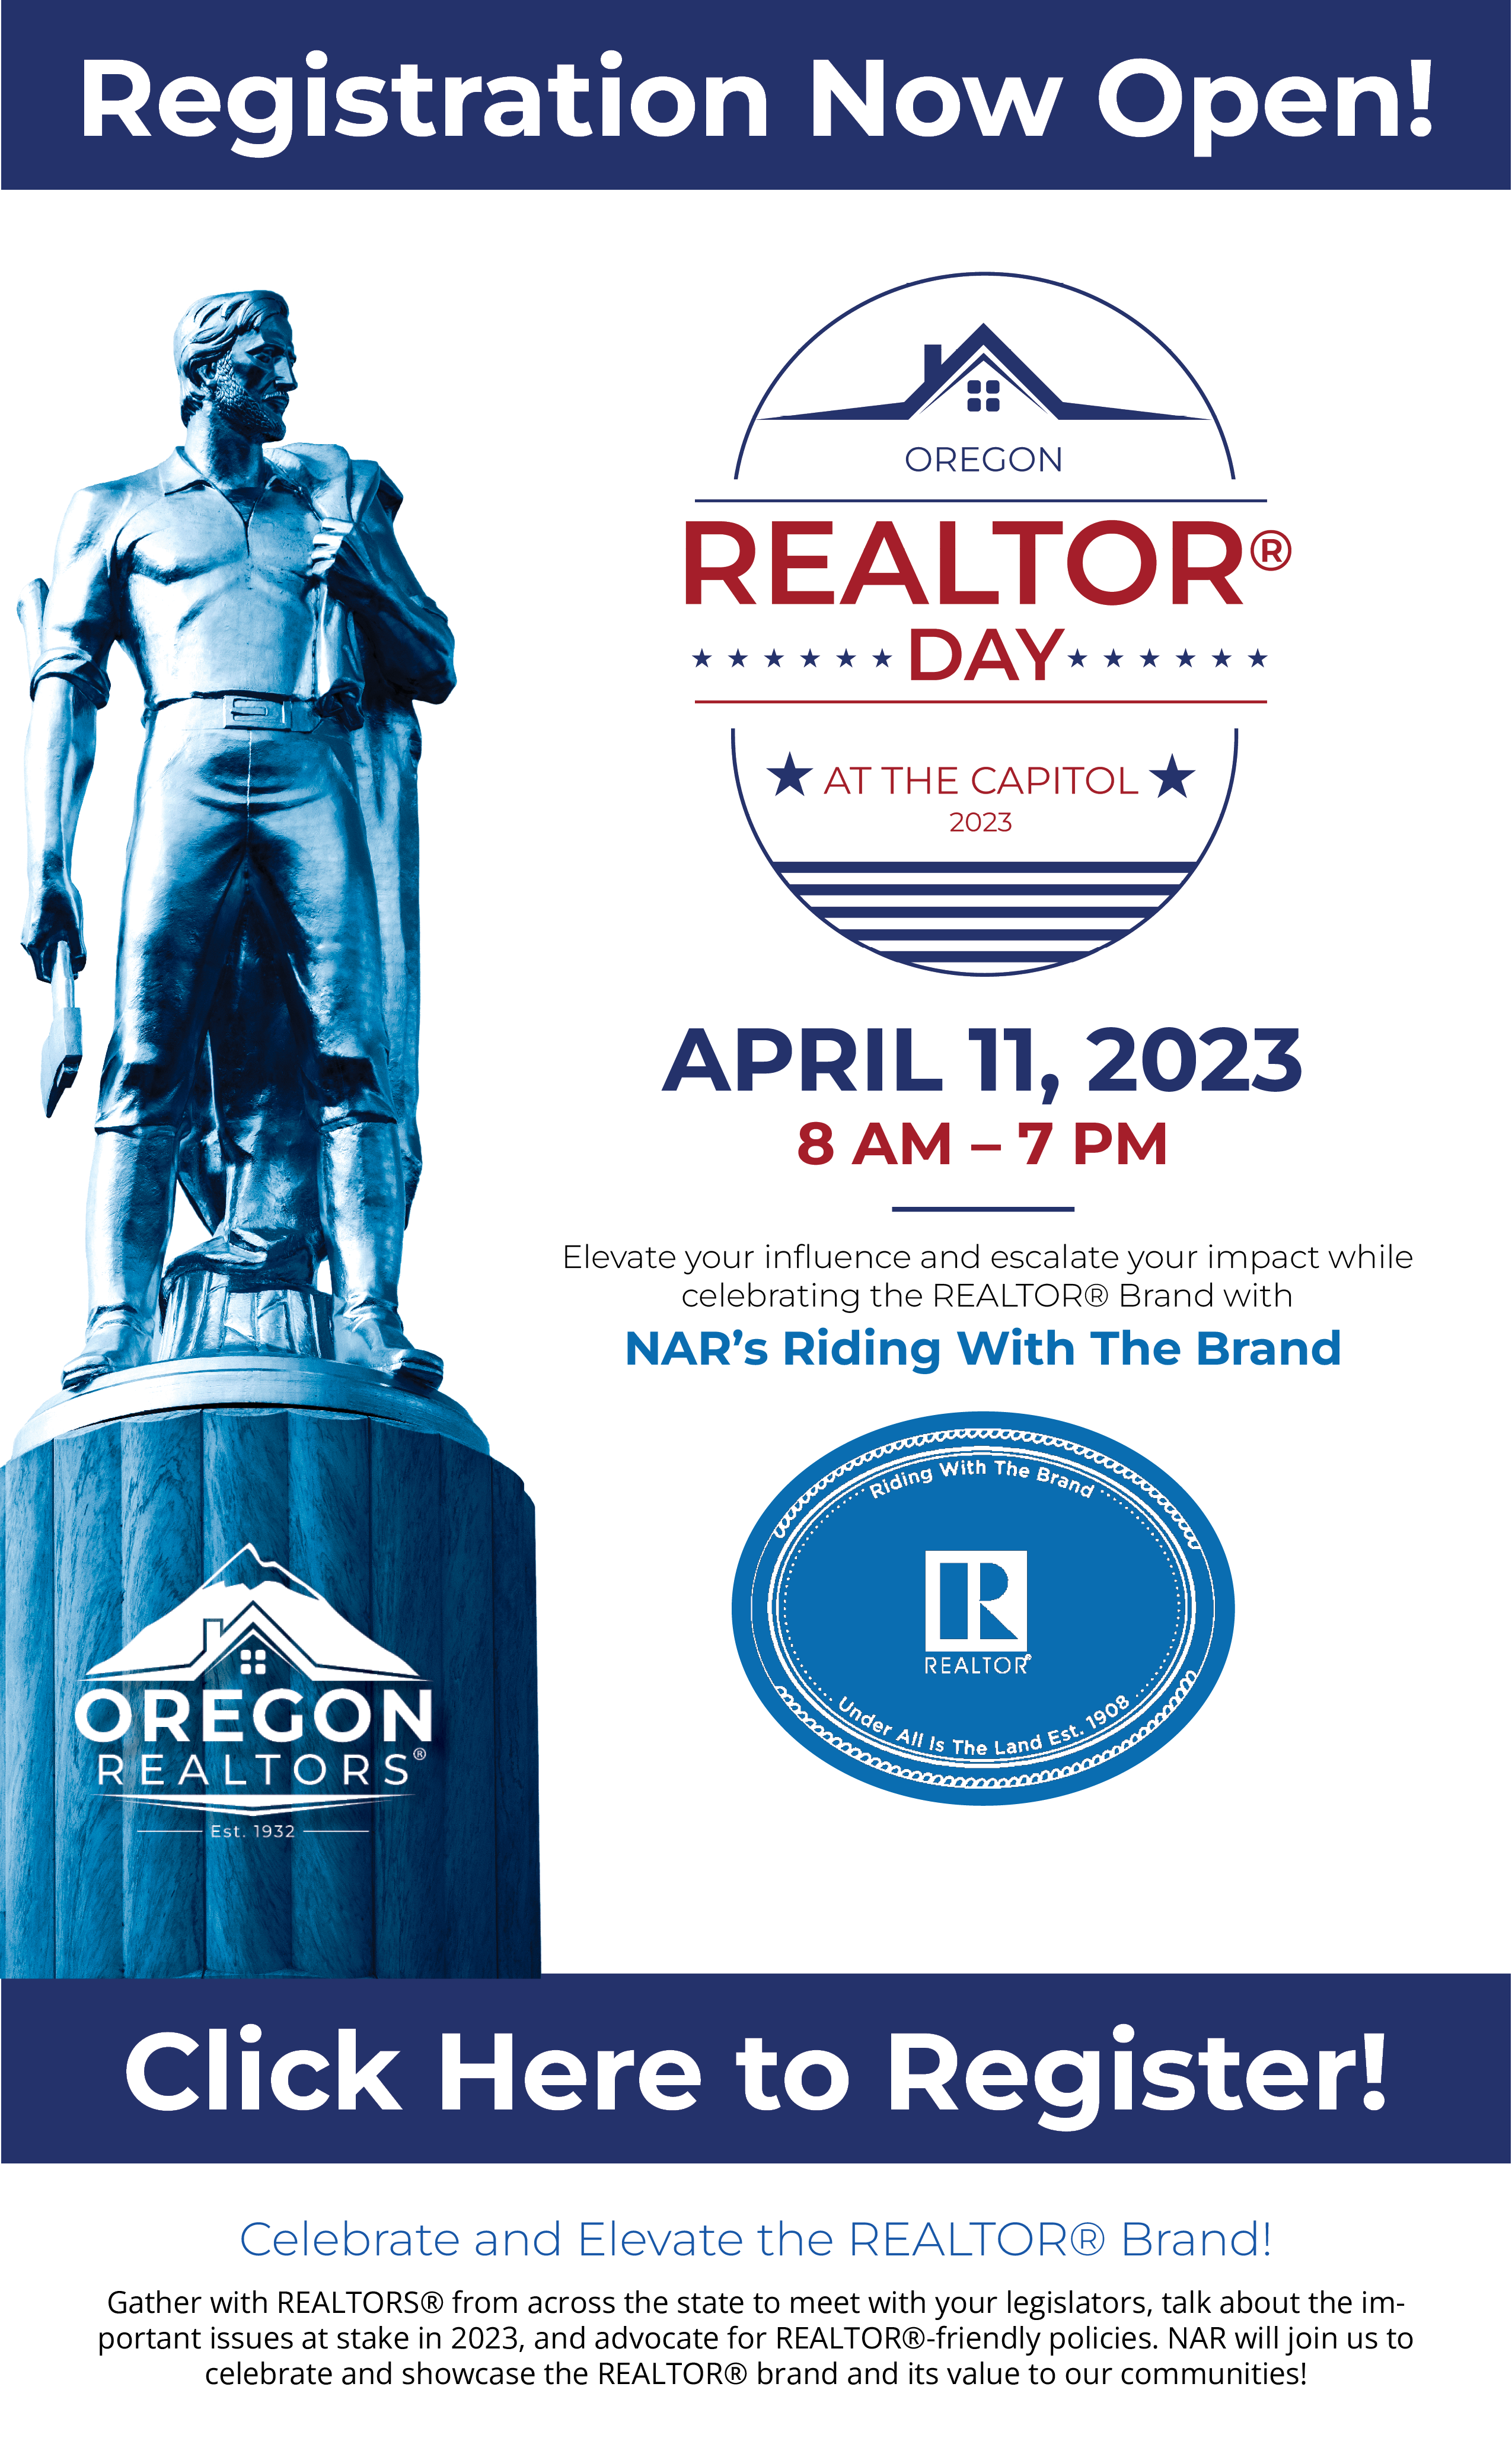 REALTOR Day at the Capitol. April 11, 2023. Click to Register